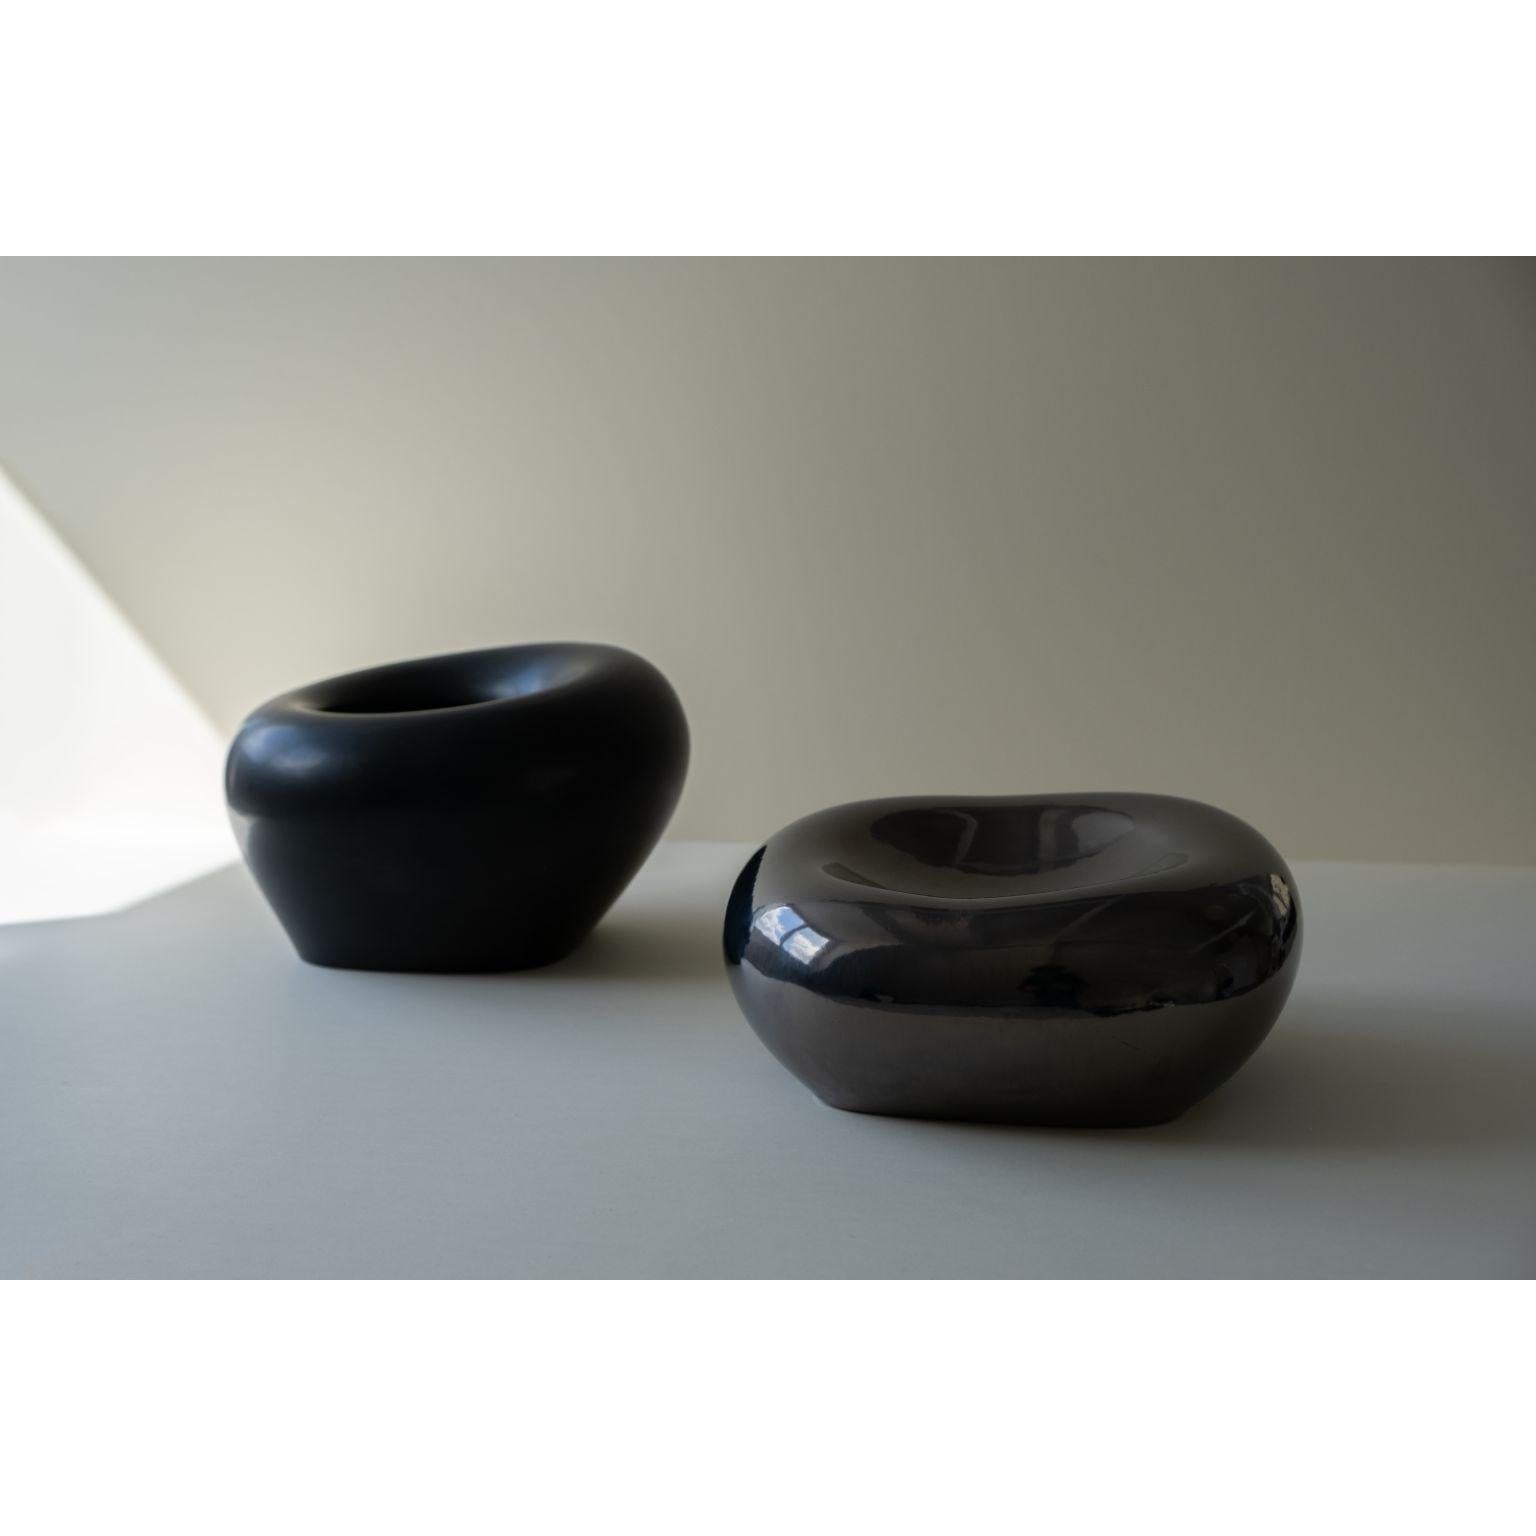 Set of 2 Flexible Formed Vase 3 and Bowl by Rino Claessens
Dimensions: Flexible Formed Bowl: D 25 x W 27 x H 11.5 cm.
Flexible Formed Vase 3: D 26 x W 26 x H 16.5 cm.
Materials: Glazed ceramic.
Finish: Bowl: Reflictive mirror glaze finish.
Vase